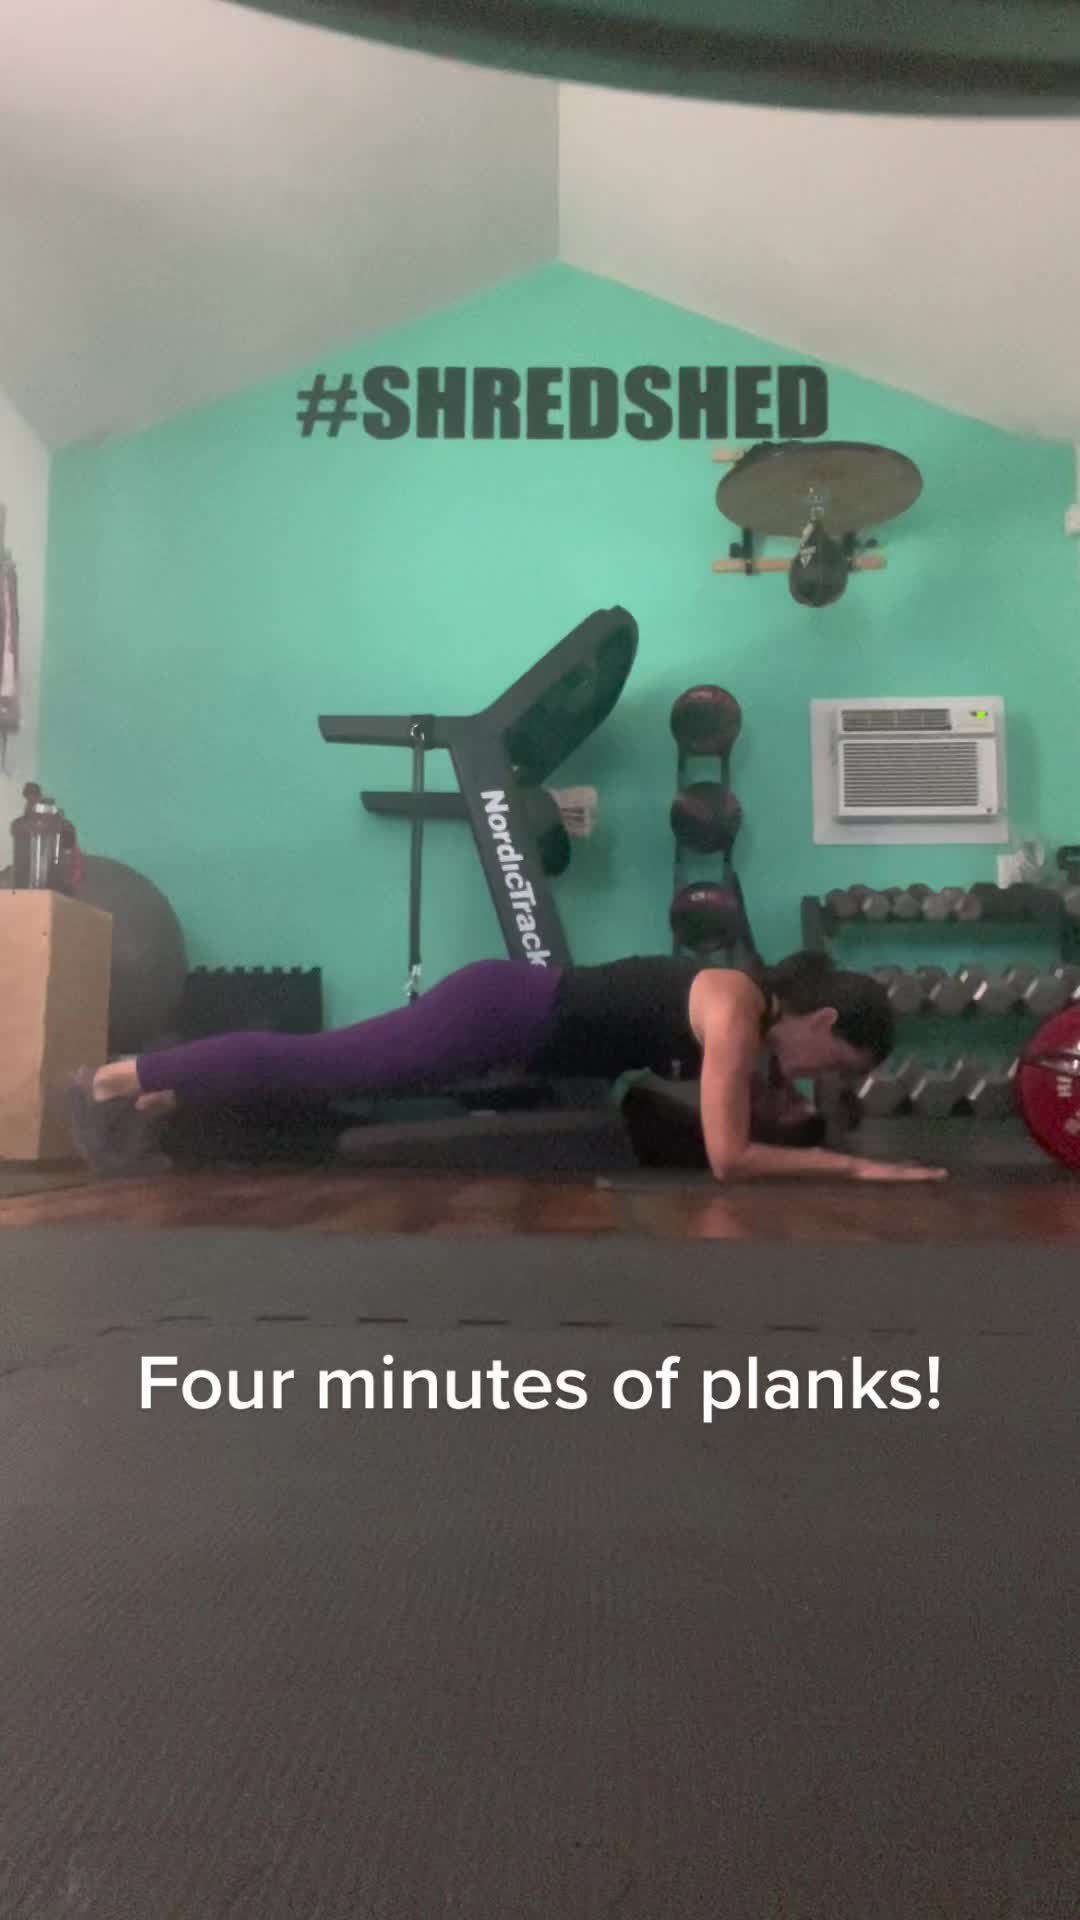 @Four minutes of planks! If you cant do it continiously, then...